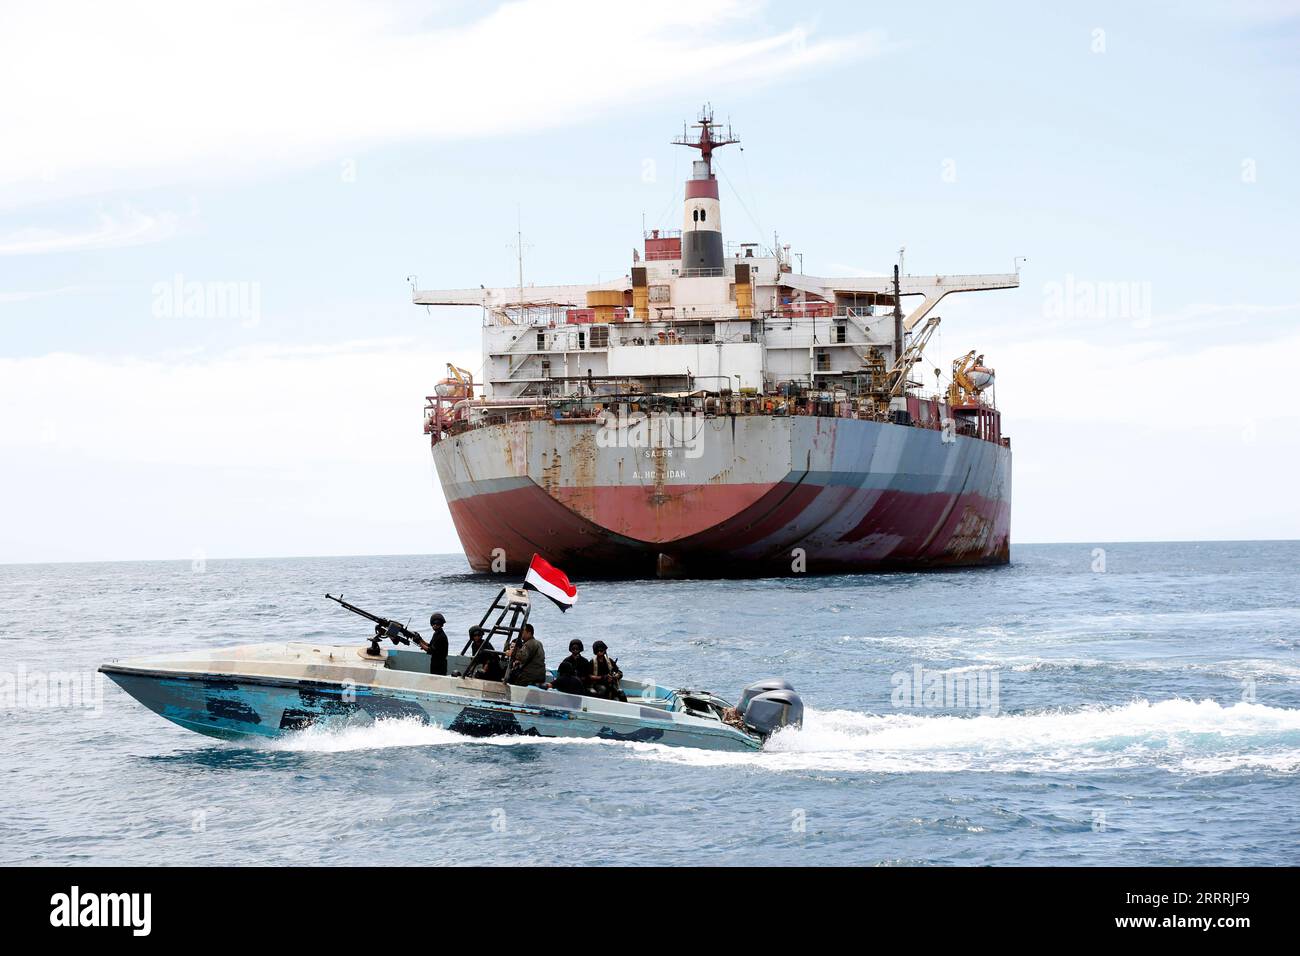 230530 -- HODEIDAH YEMEN, May 30, 2023 -- A Yemen s coast guard boat sails past the FSO Safer vessel at Ras Issa port in Hodeidah province, Yemen, on May 30, 2023. A United Nations UN ship arrived on Tuesday at the site of the floating storage and offloading FSO Safer vessel, a decaying super oil tanker, off the coast of Ras Issa, Hodeidah in western Yemen. Photo by /Xinhua YEMEN-HODEIDAH-DECAYING SUPER OIL TANKER-UN VESSEL-RESCUE PREPARATION MohammedxMohammed PUBLICATIONxNOTxINxCHN Stock Photo